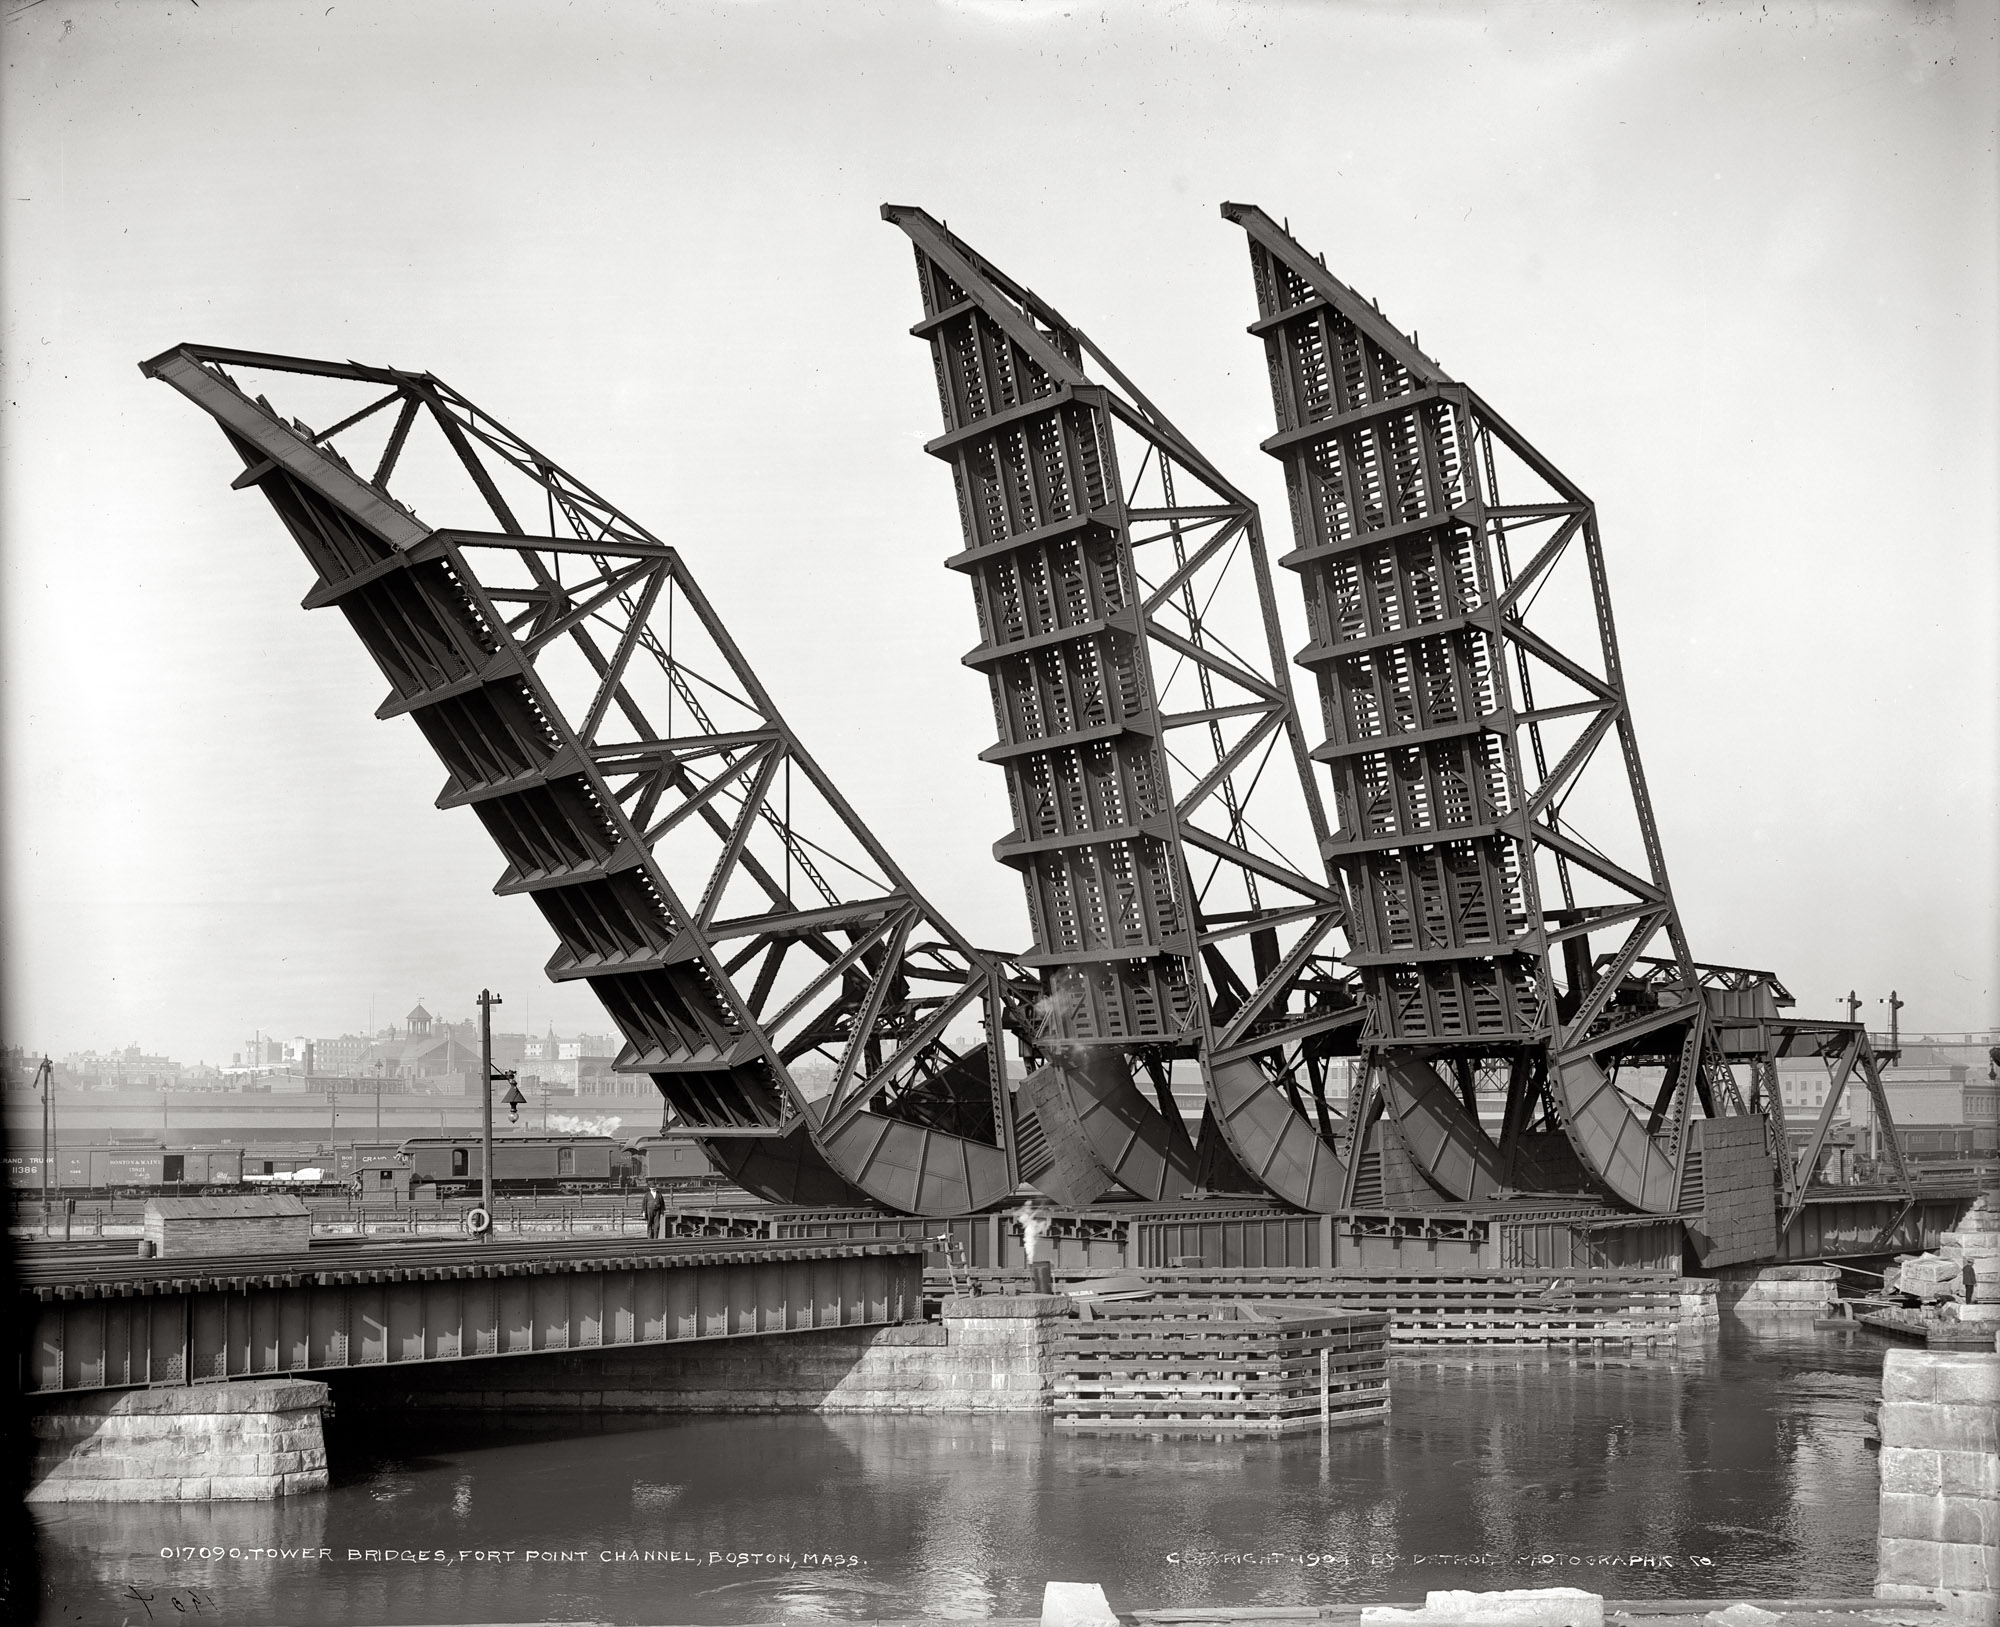 "Tower bridges, Fort Point Channel, Boston, 1904." Spans for Northern Avenue, Congress Street and Summer Street. Detroit Publishing Co. View full size.